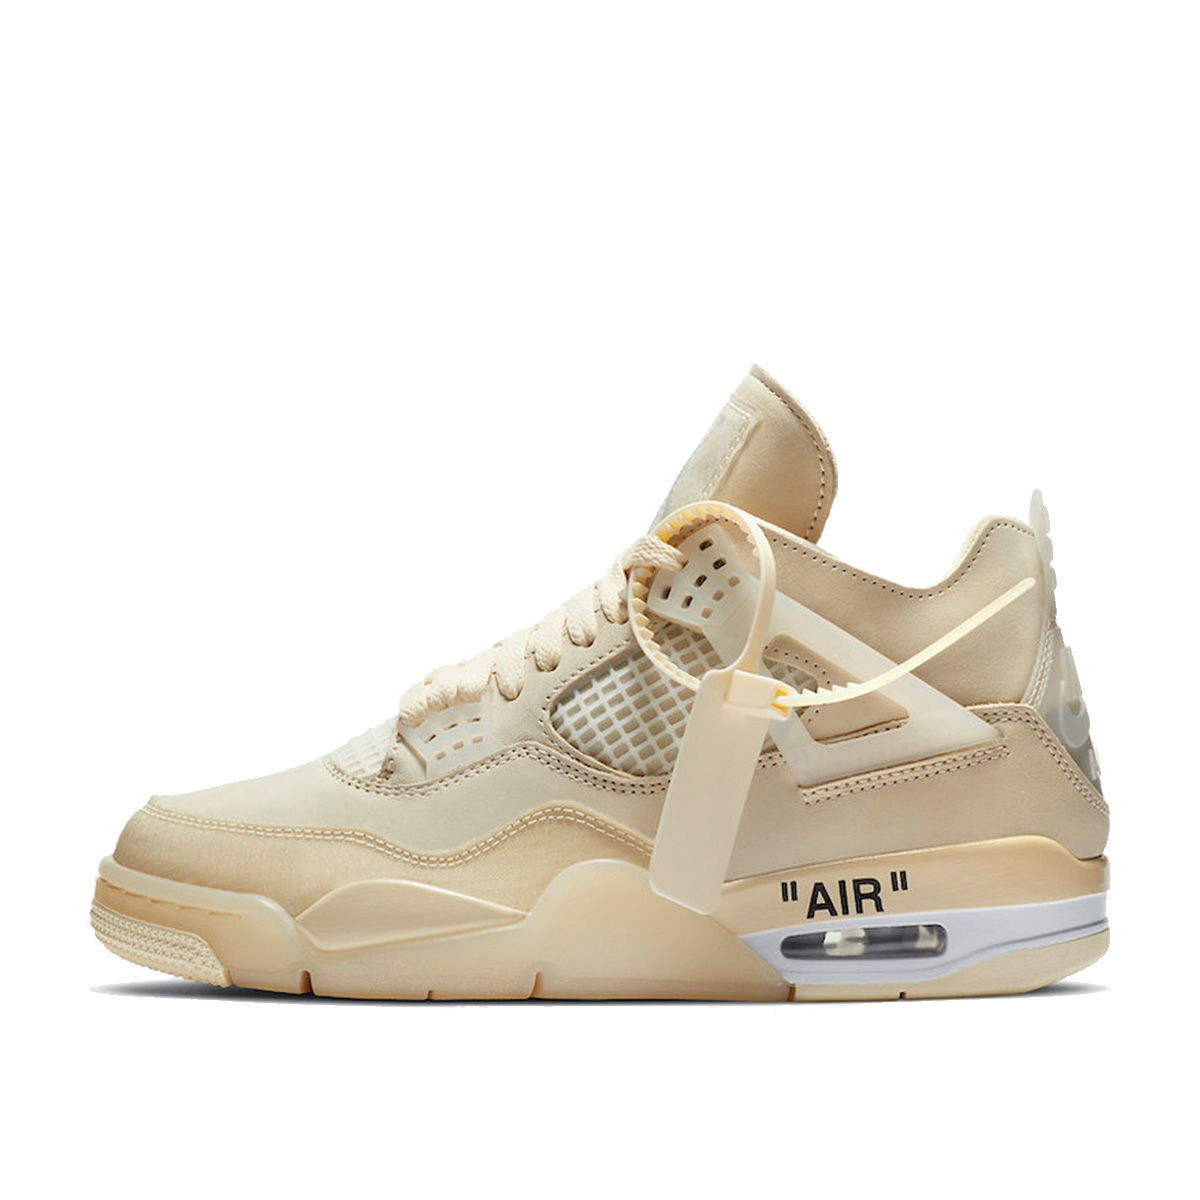 Off-White™ x Air Jordan 4s Could Be on the Way - KLEKT Blog